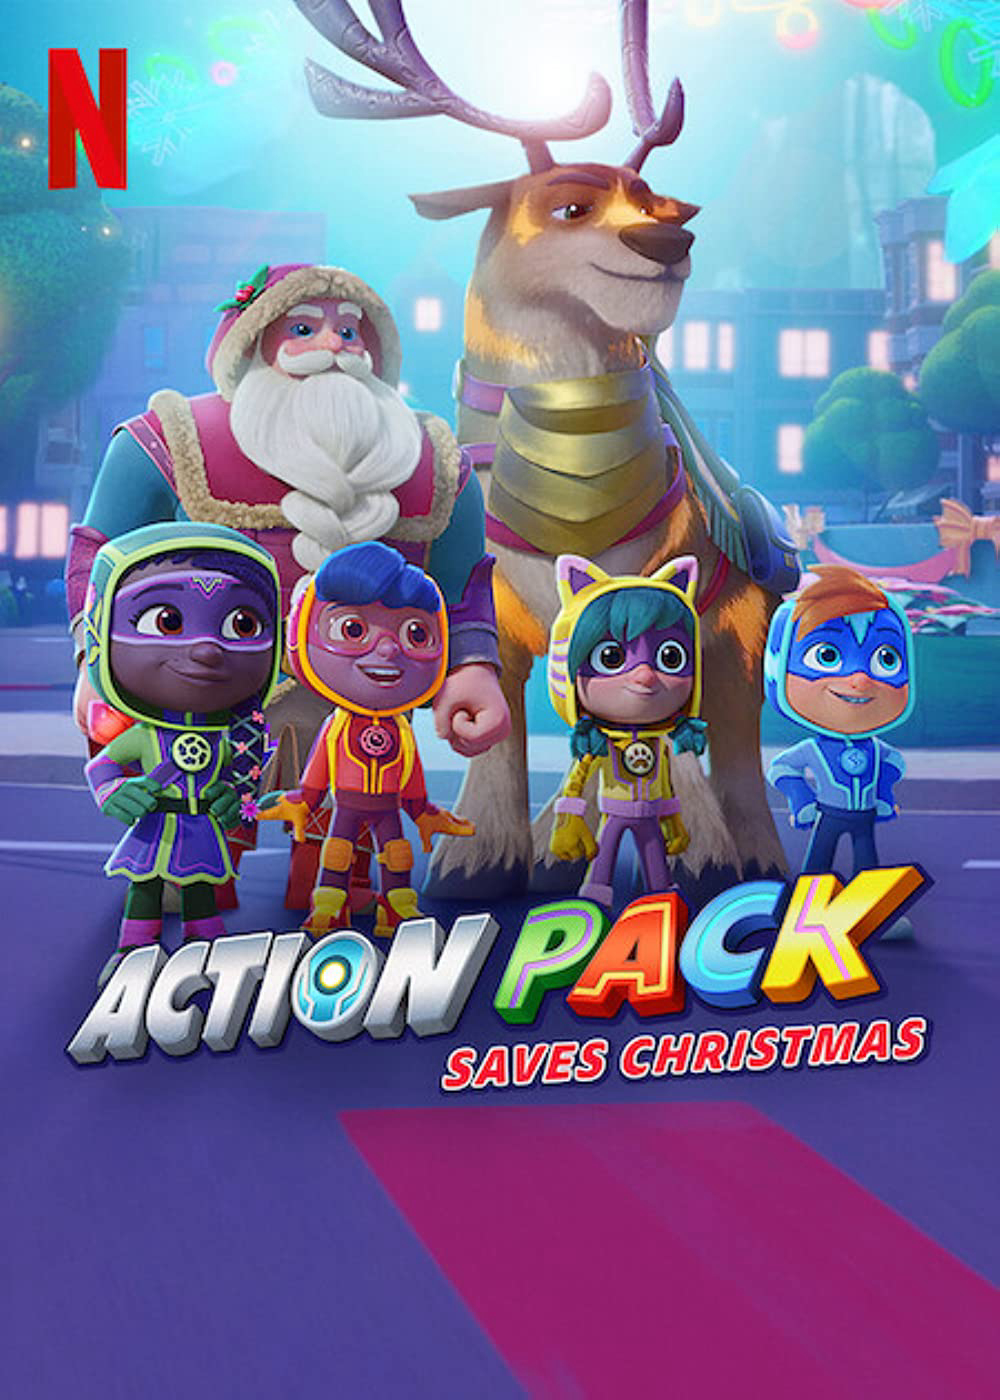 Xem Phim Action Pack giải cứu Giáng sinh (The Action Pack Saves Christmas)